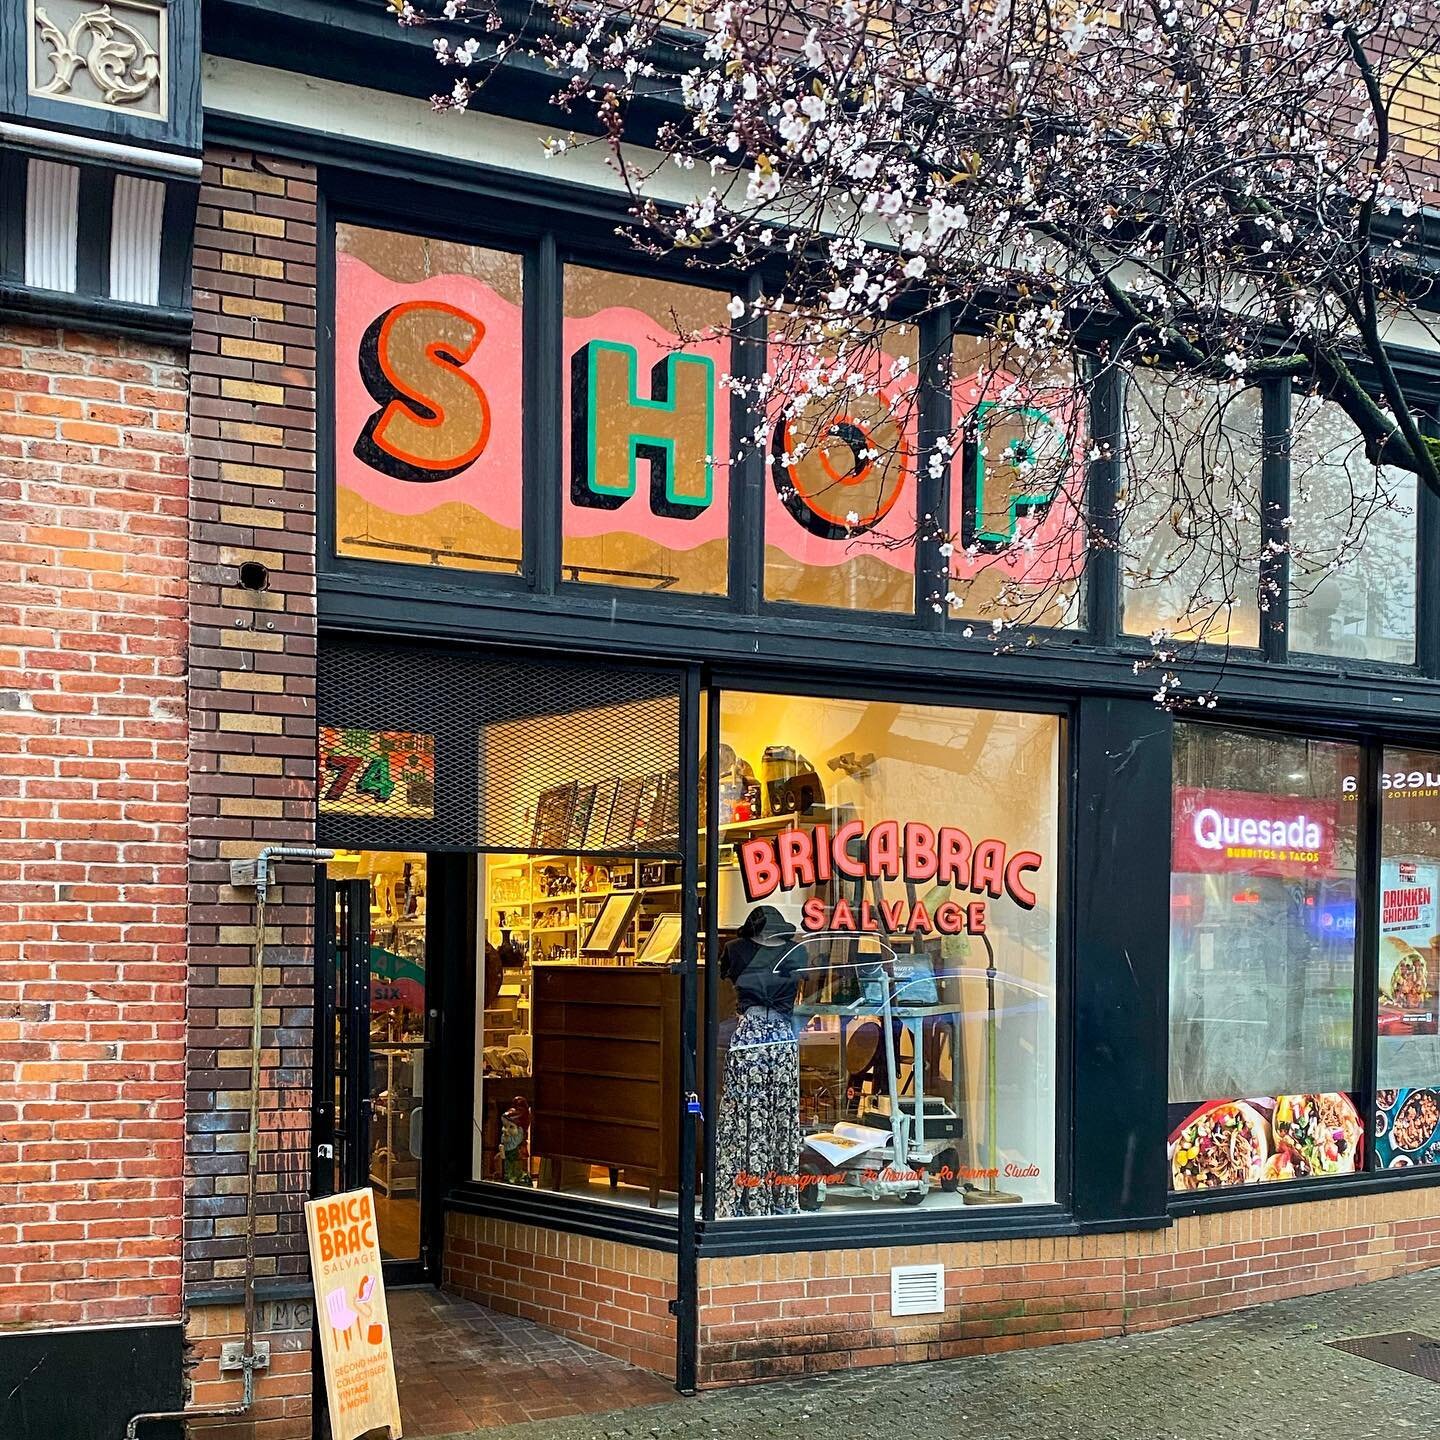 We&rsquo;d like to welcome @bricabracsalvage to their new location at Adelphi Block (Yates Street storefront)! Pop in and find some treasures next time you&rsquo;re downtown!